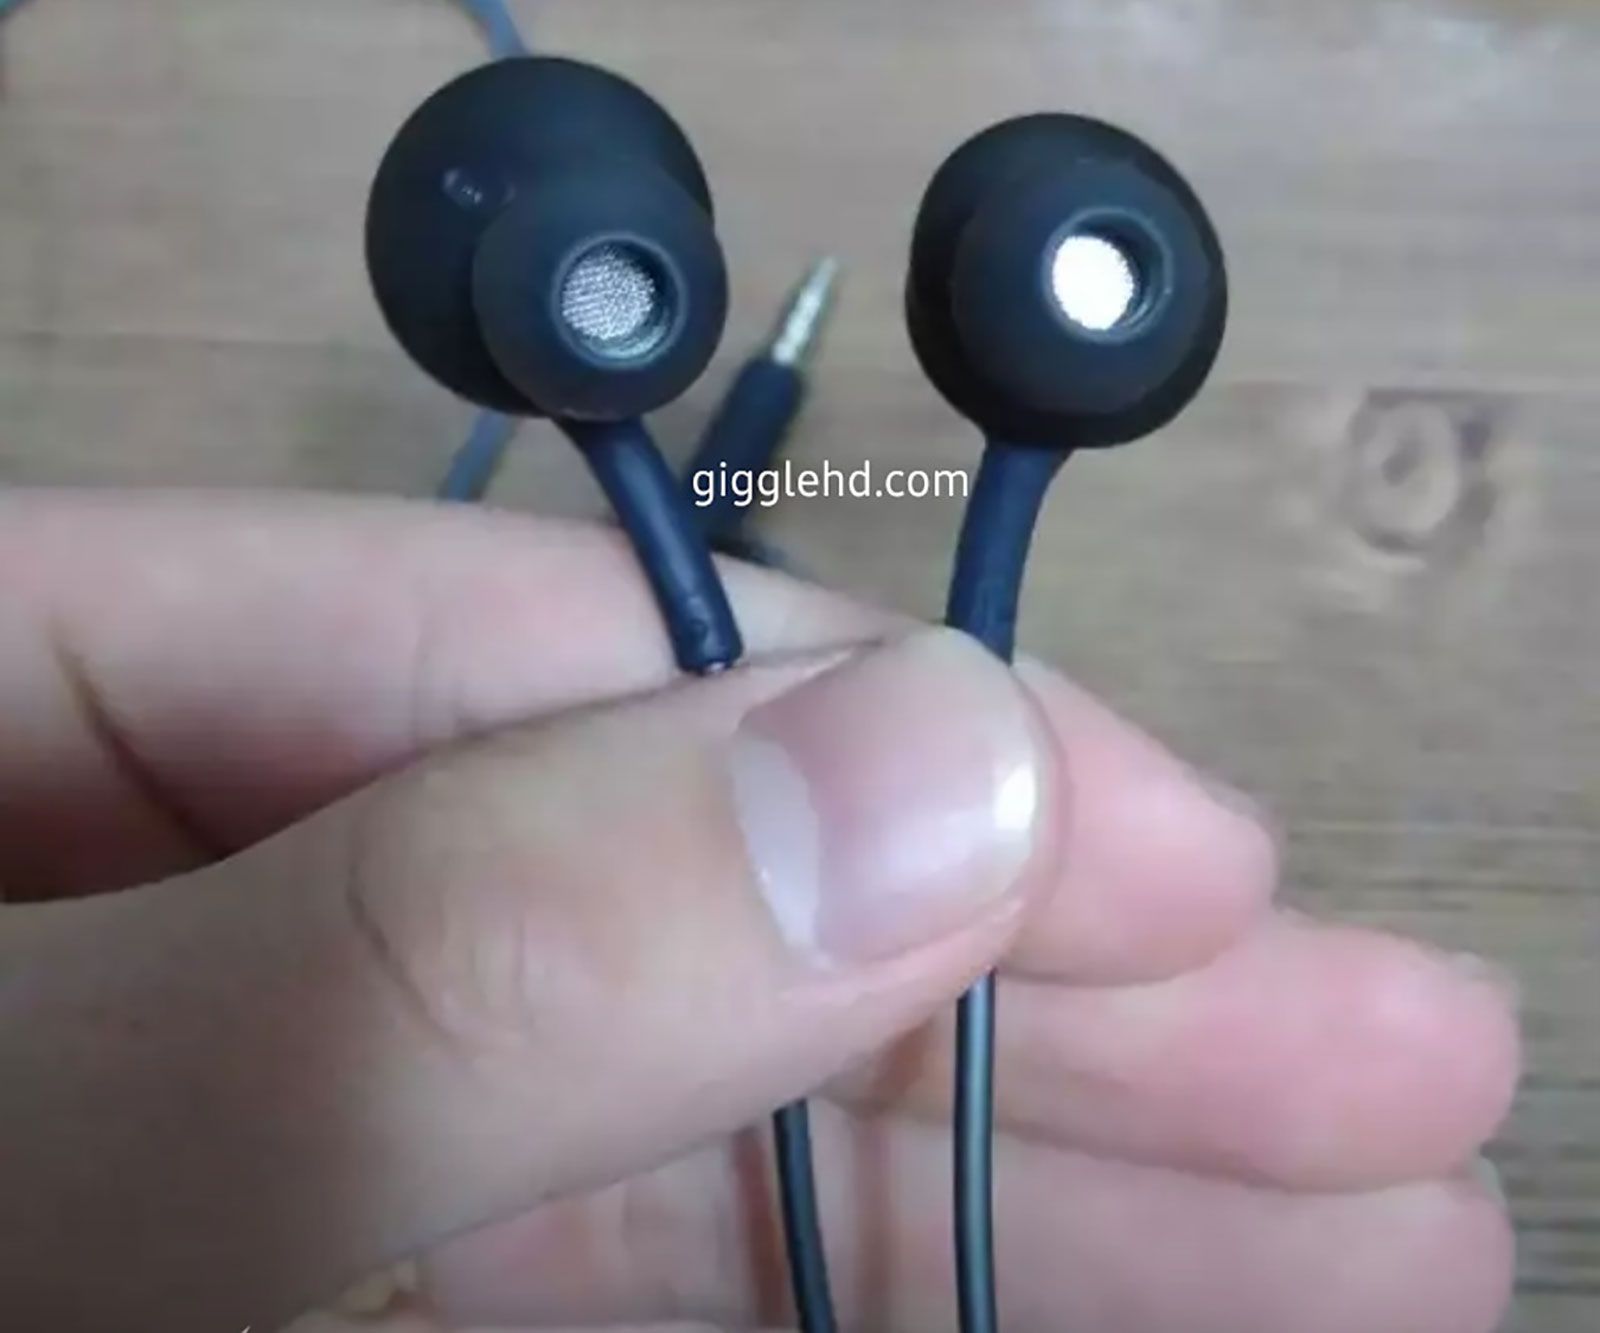 real life images of samsung s akg headphones confirm 3 5mm jack image 1